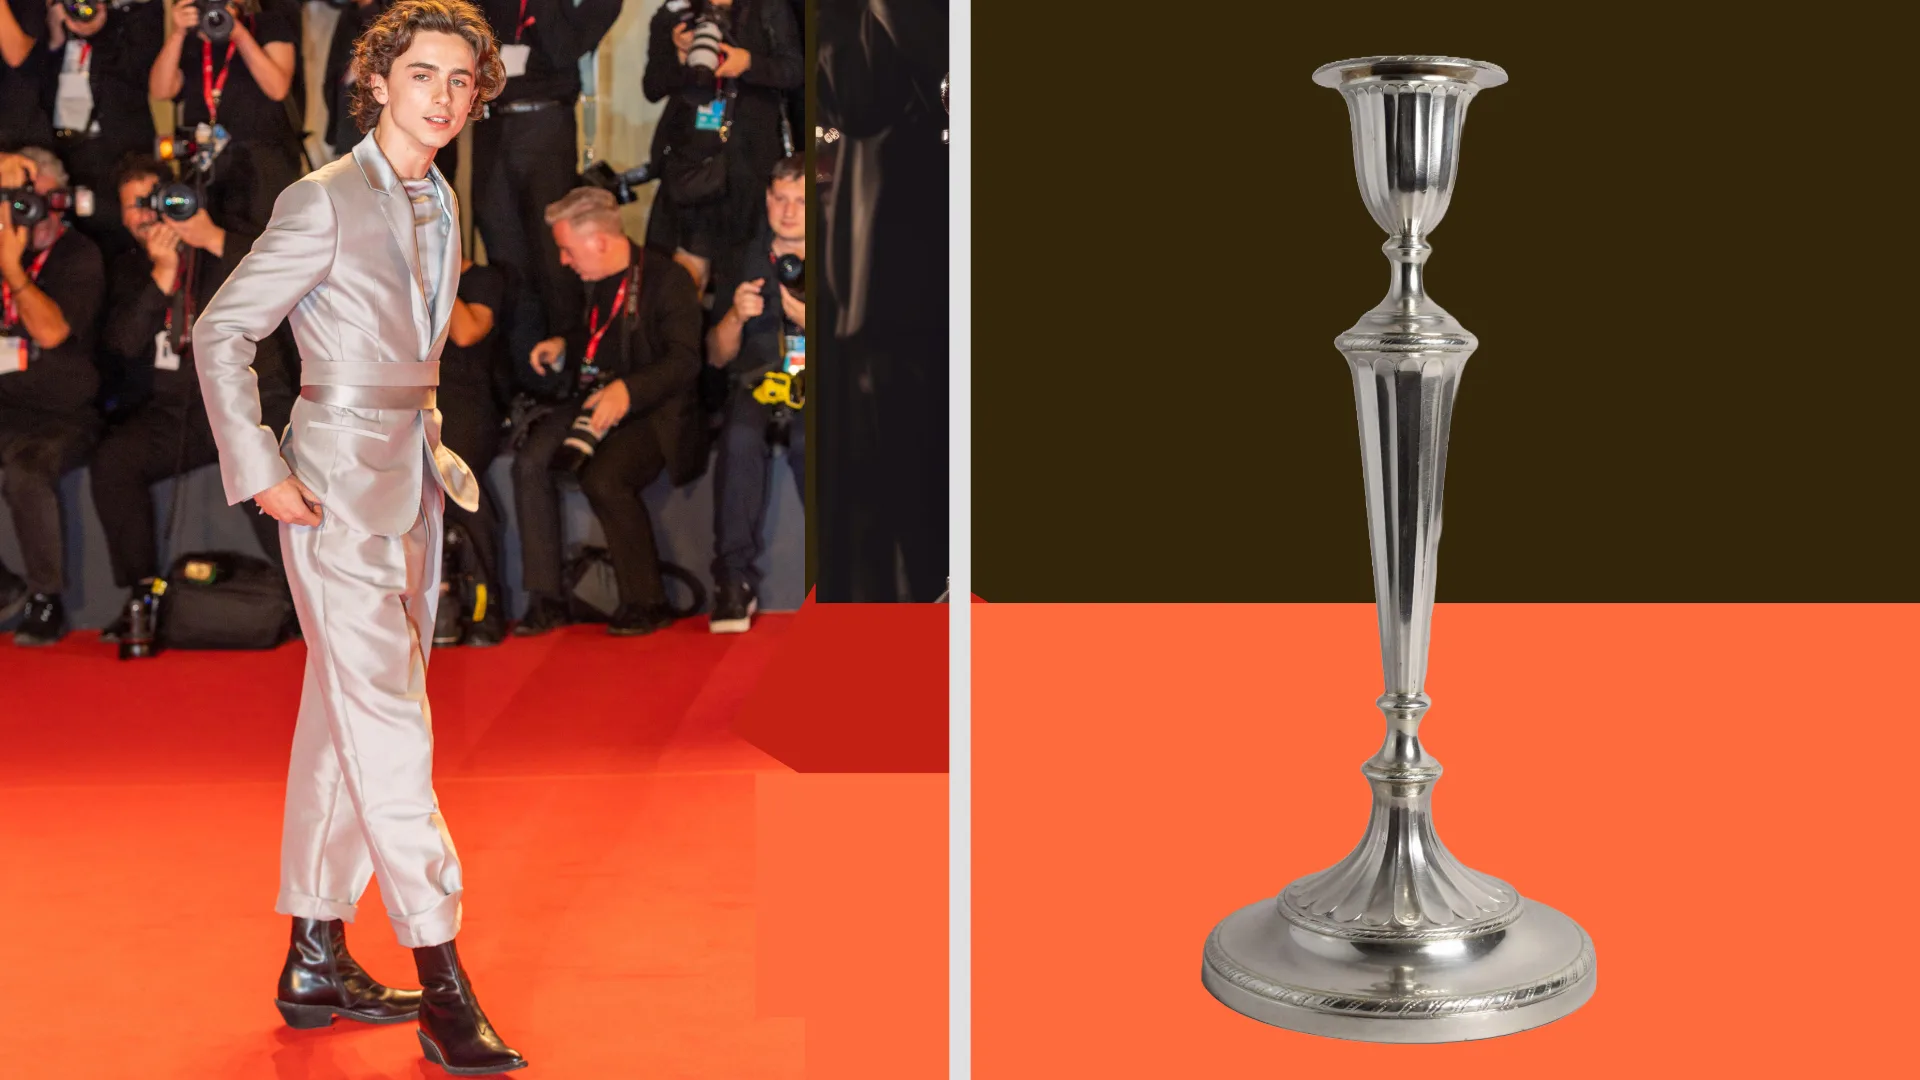 Timothee Chalamet in a silver suit next to a photograph of a silver candlestick holder